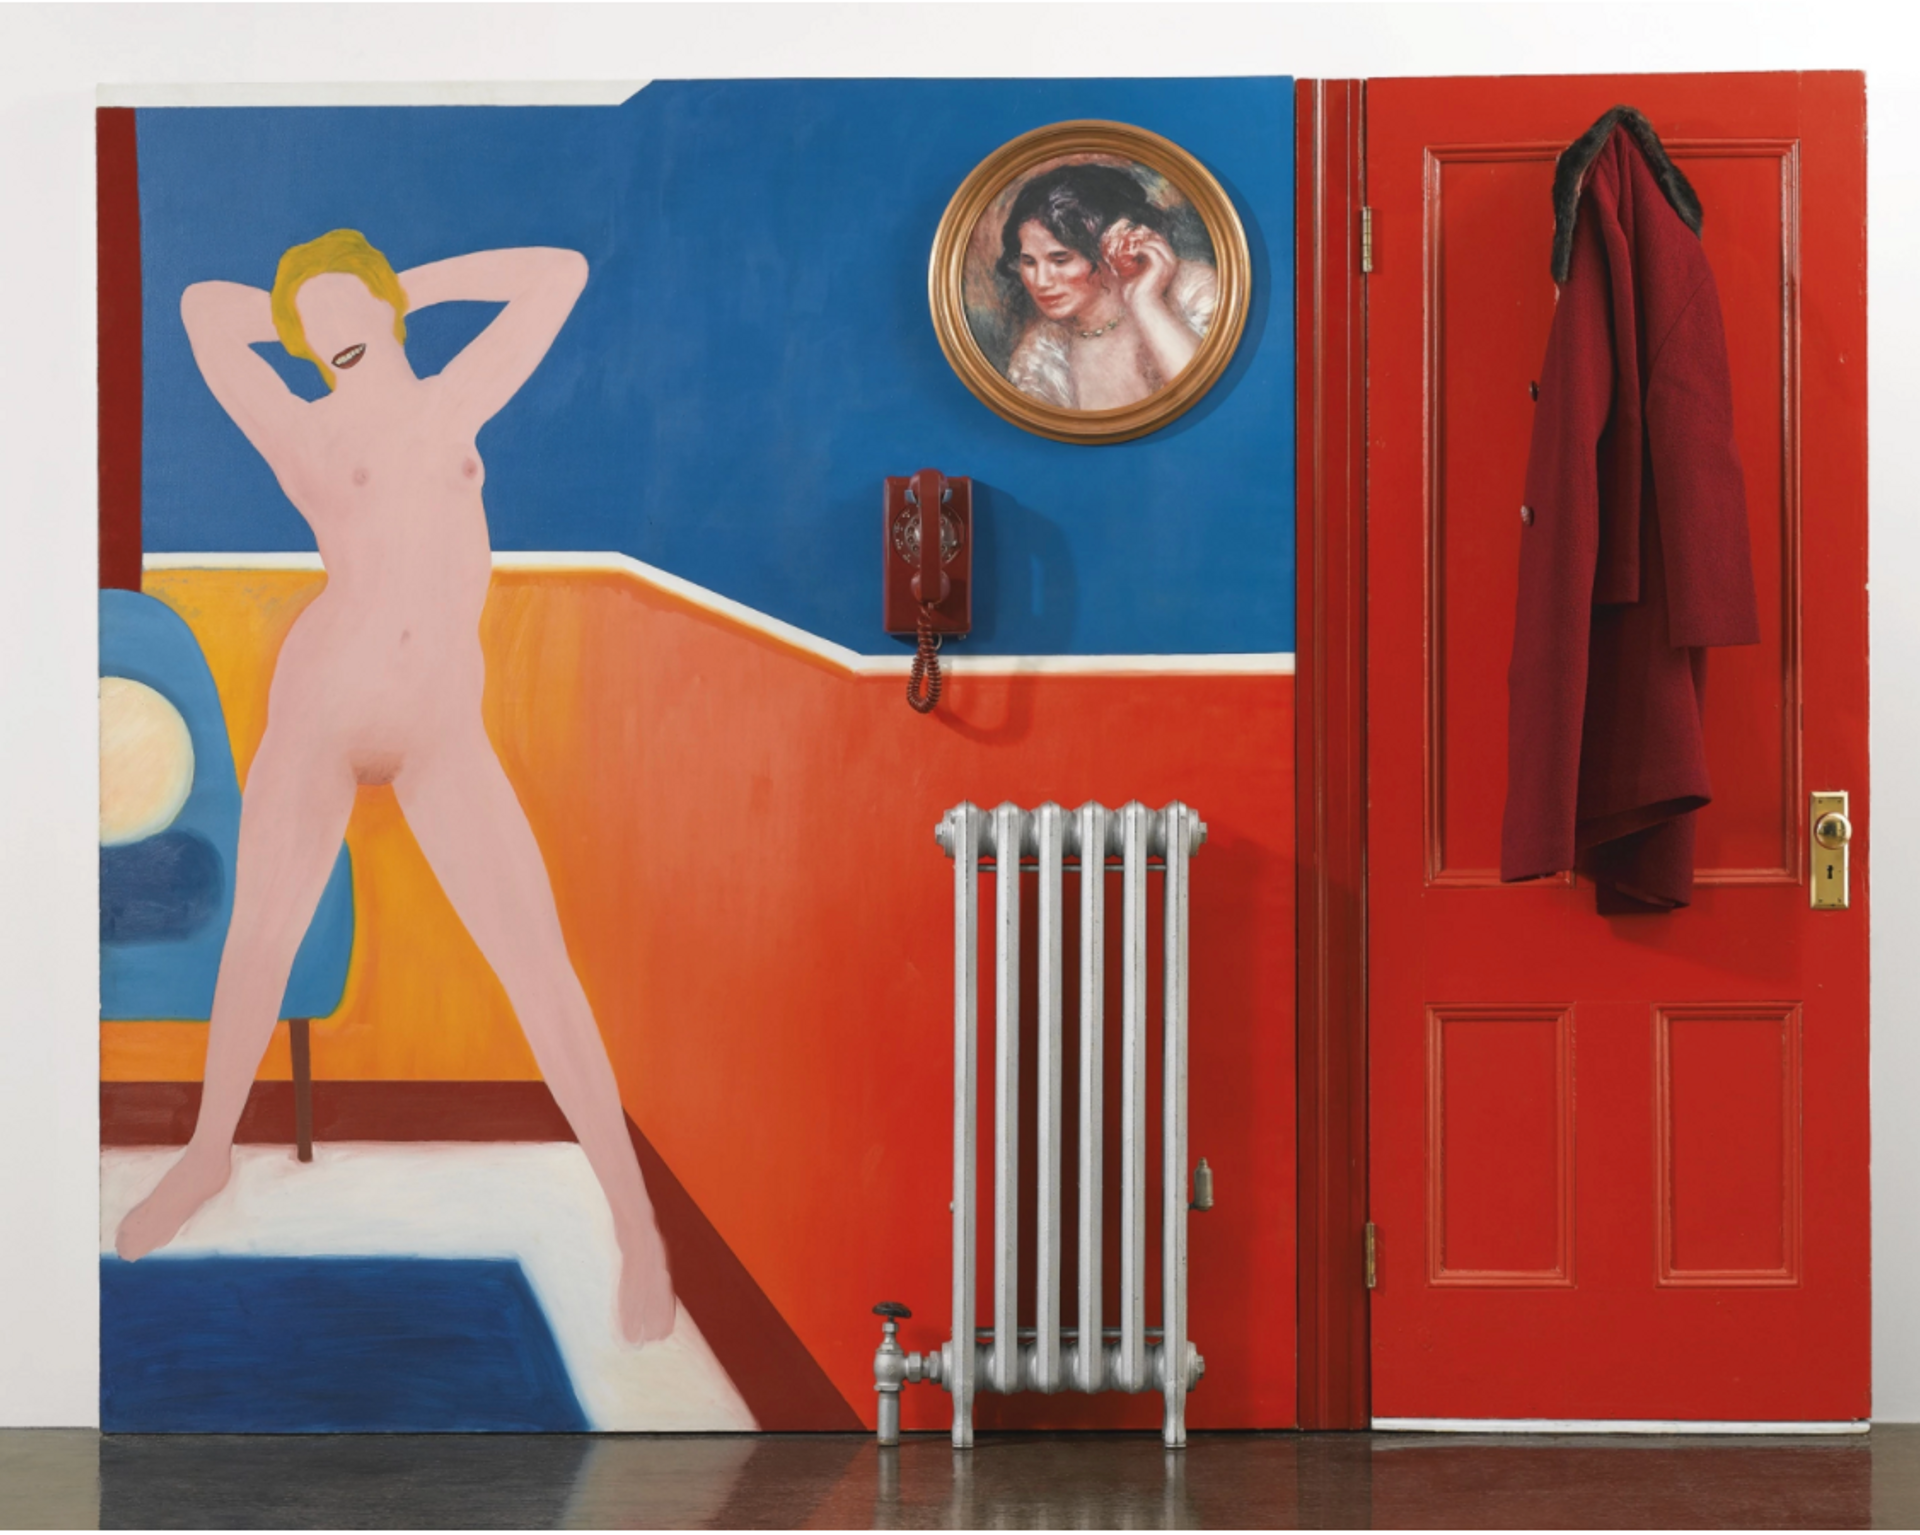 Great American Nude no. 44 by Tom Wesselmann